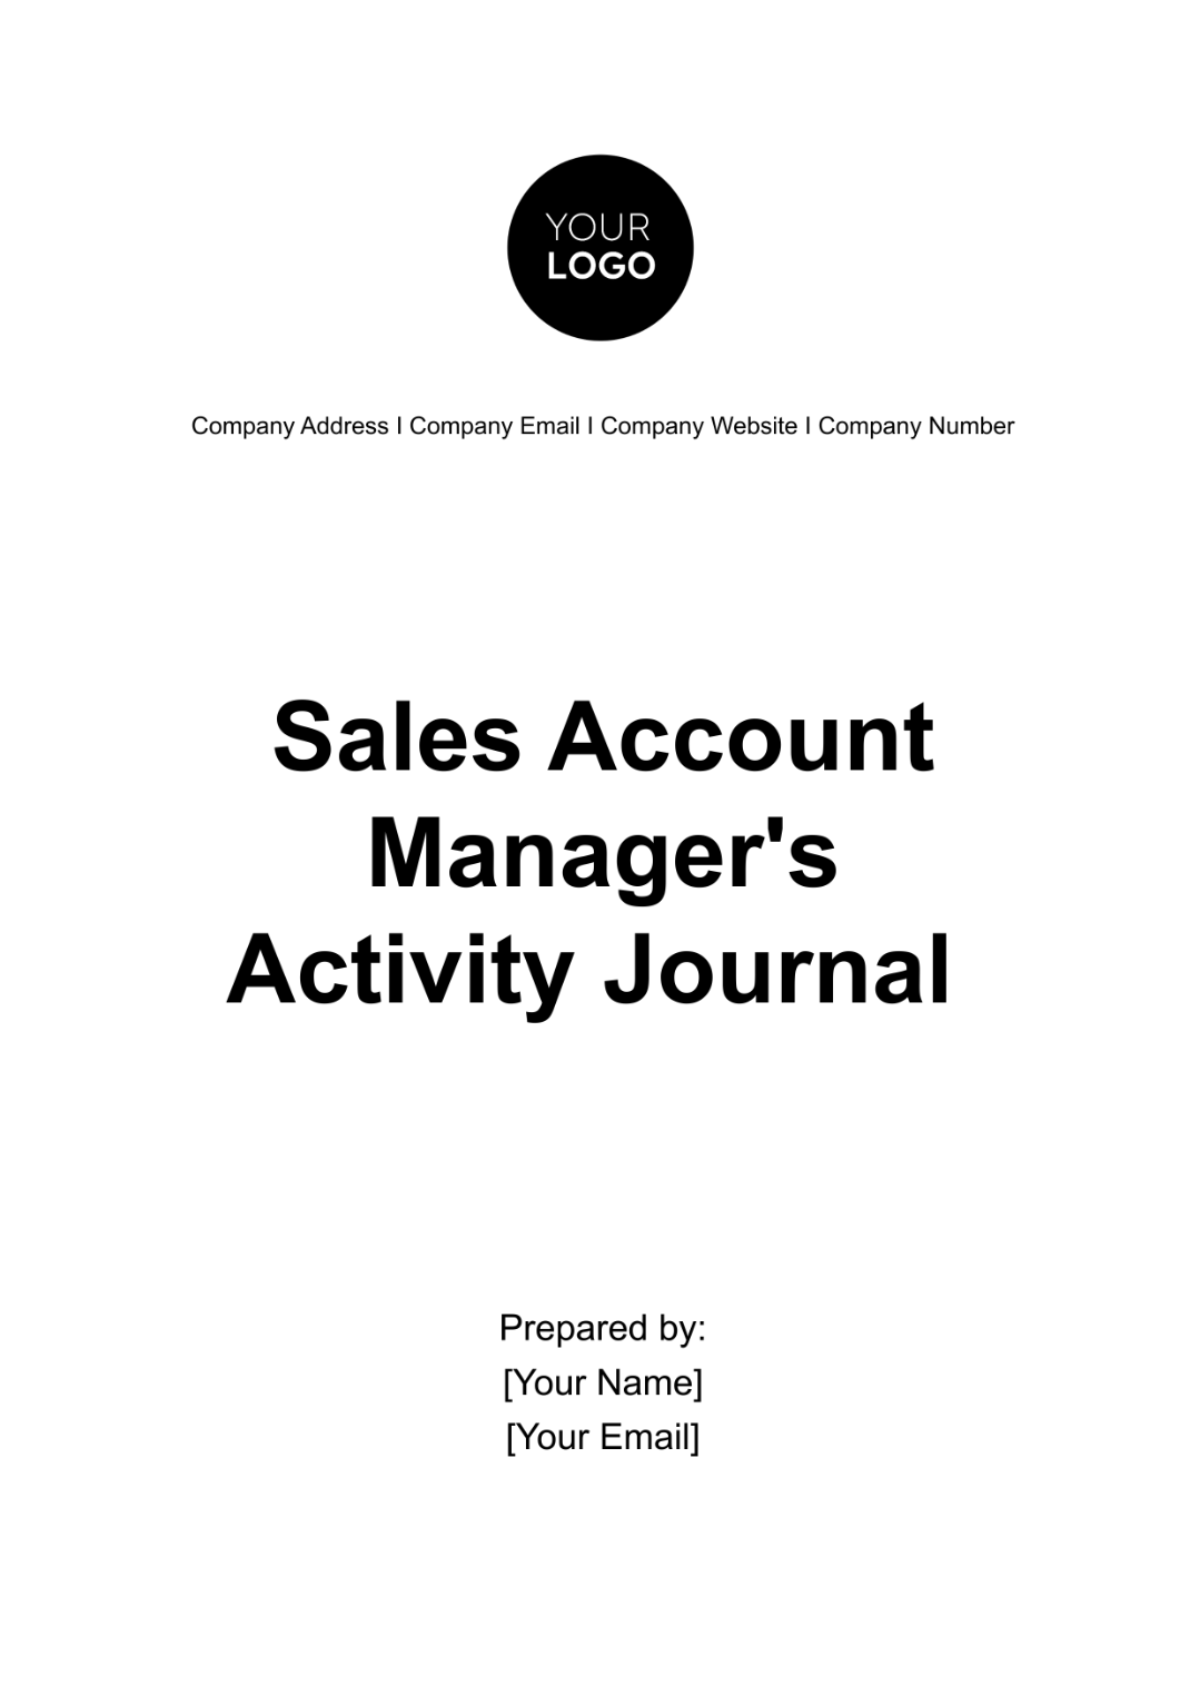 Sales Account Manager's Activity Journal Template